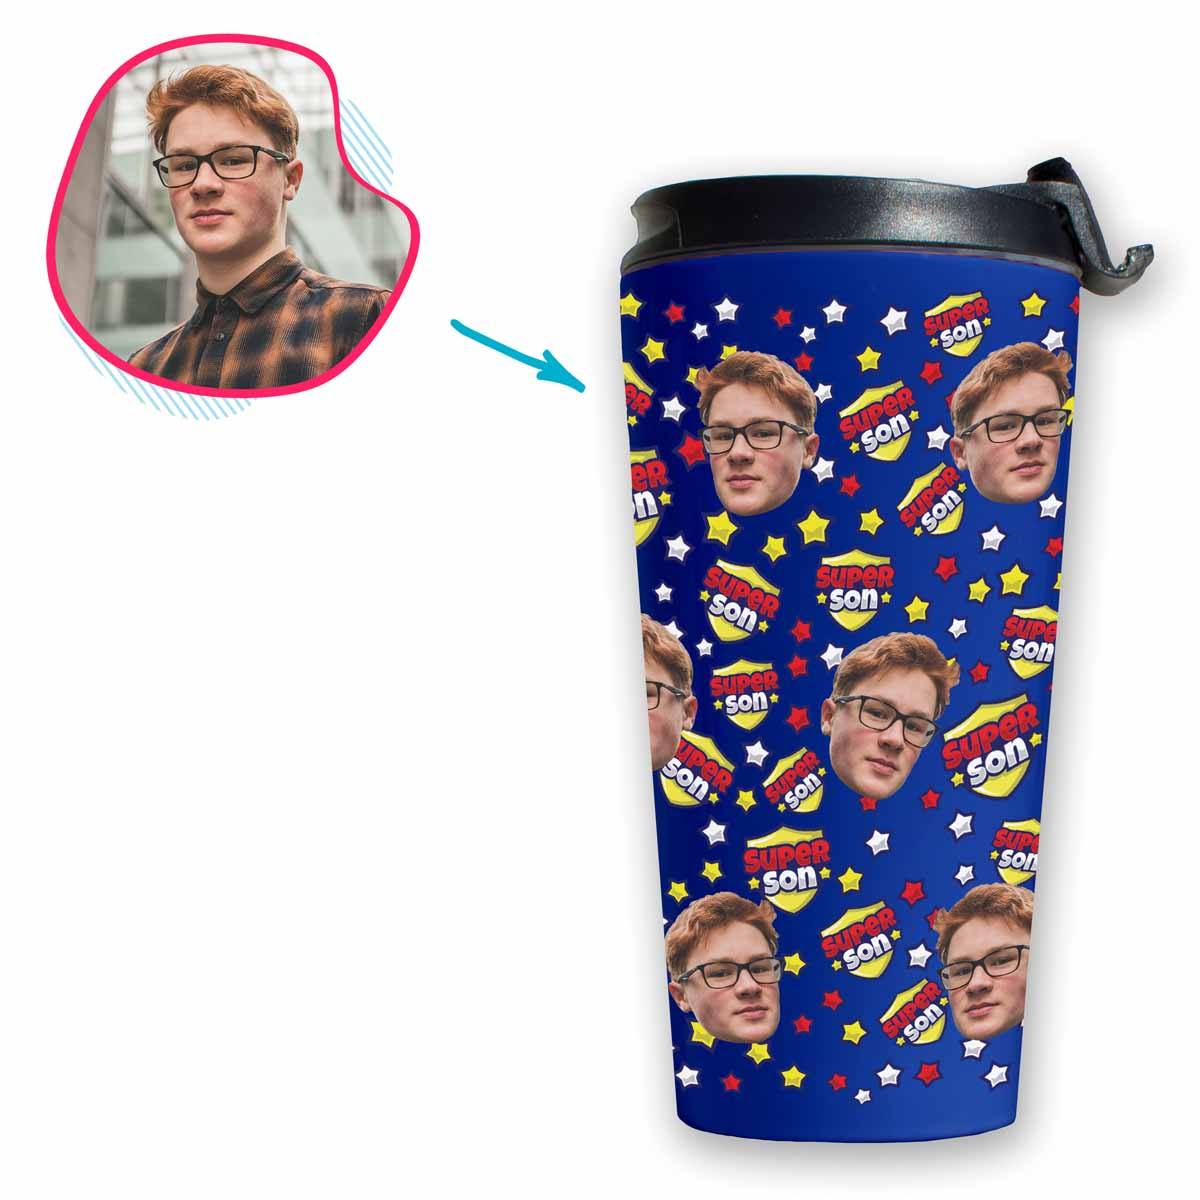 darkblue Super Son travel mug personalized with photo of face printed on it